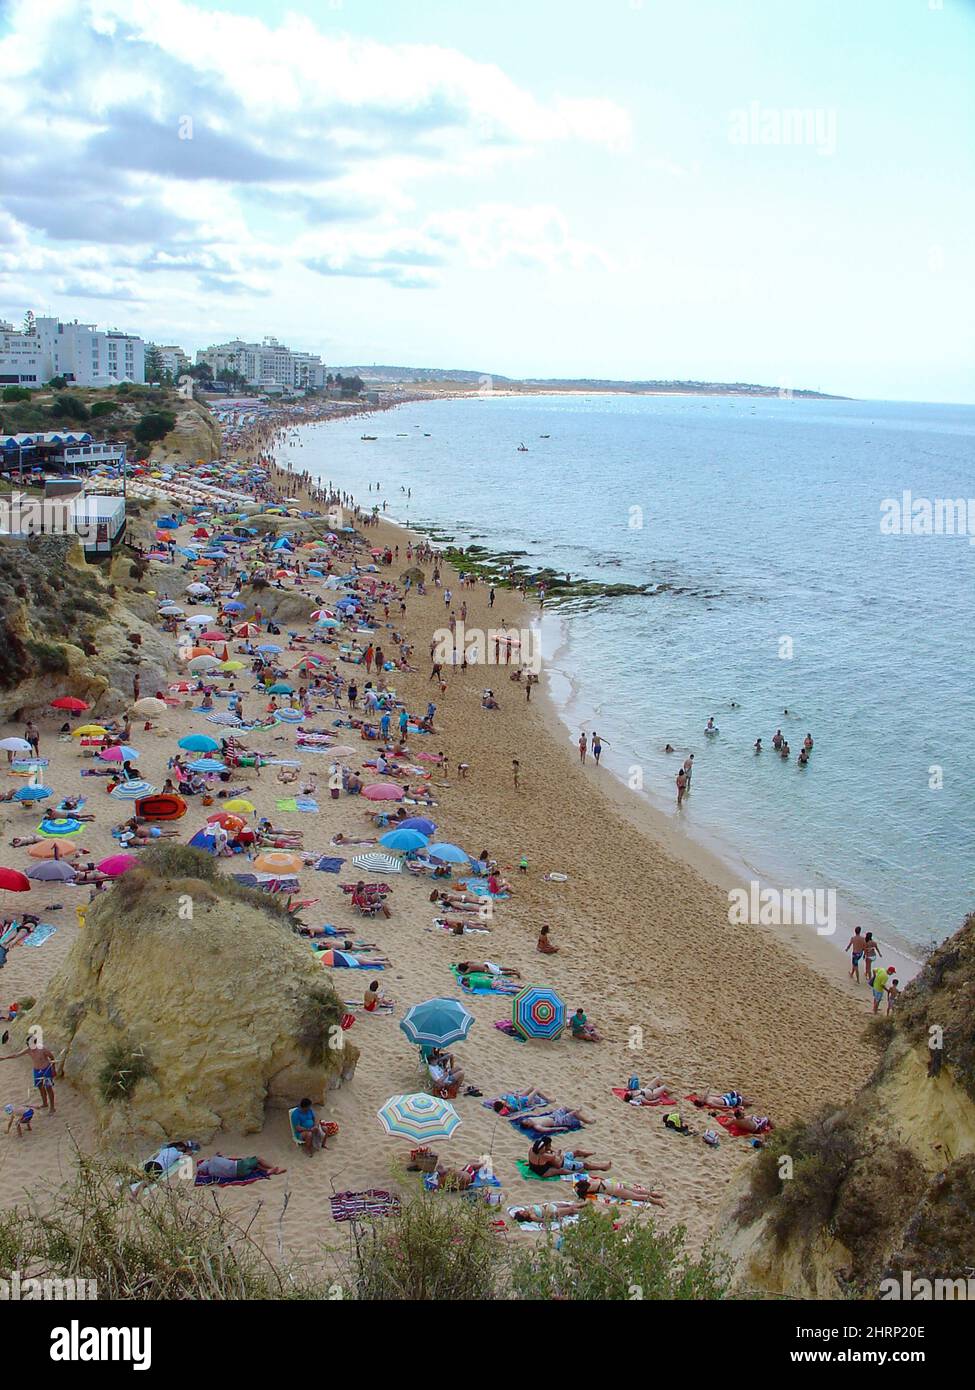 Crowded beach with tourists on Summer time season. Stock Photo